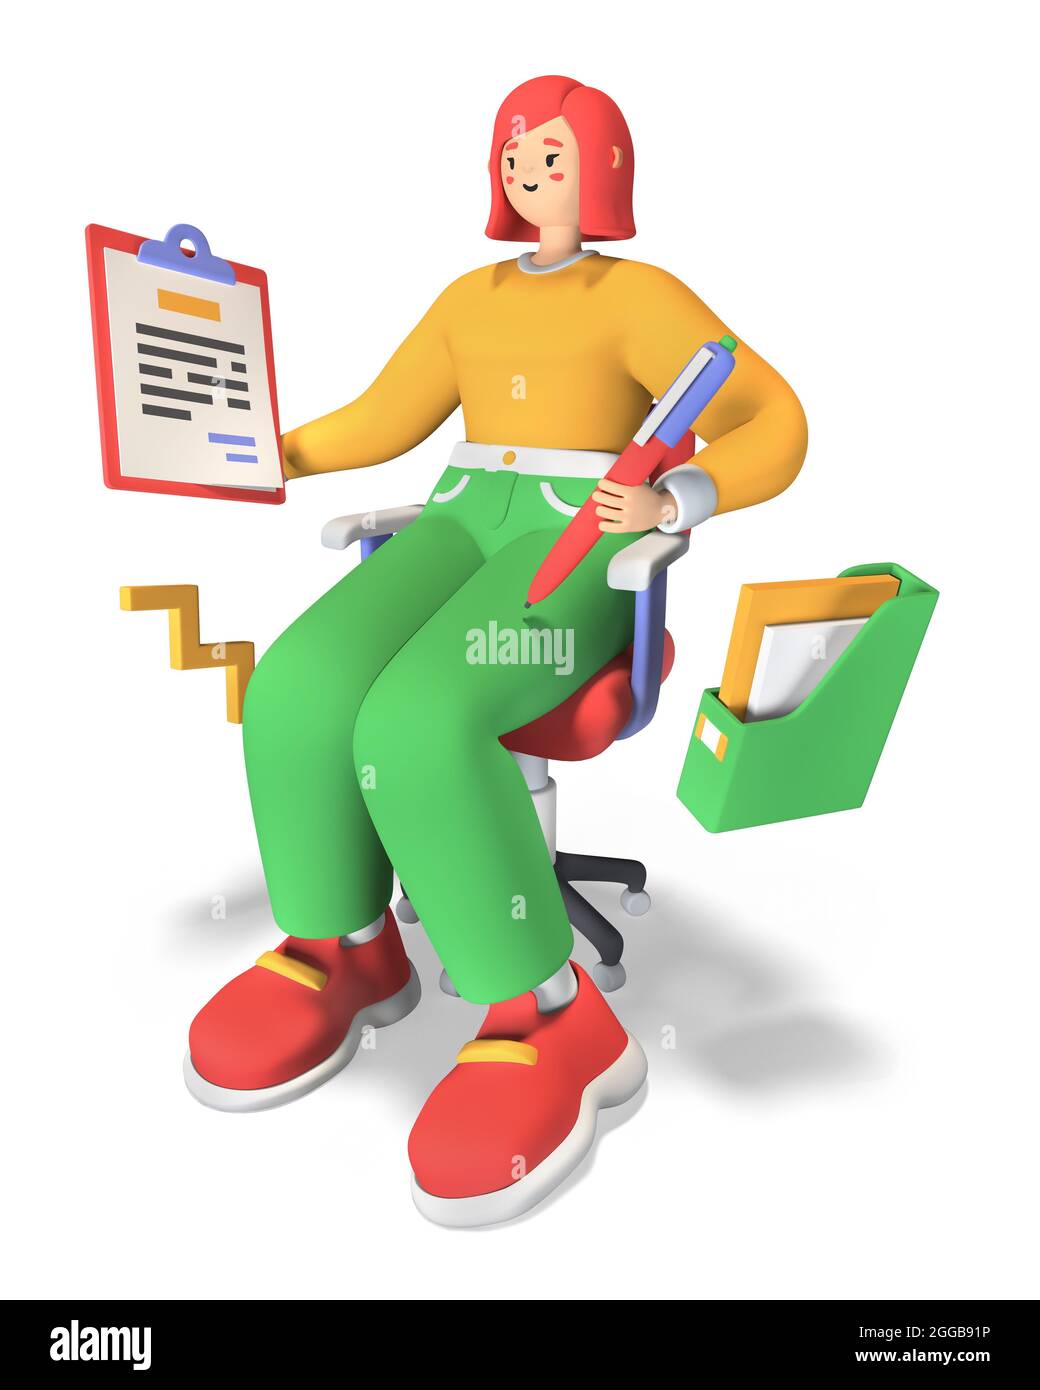 Work and planning - colorful 3D style illustration cartoon style character.  Young girl with red hair sits on a chair and makes notes in a notebook. Em  Stock Photo - Alamy